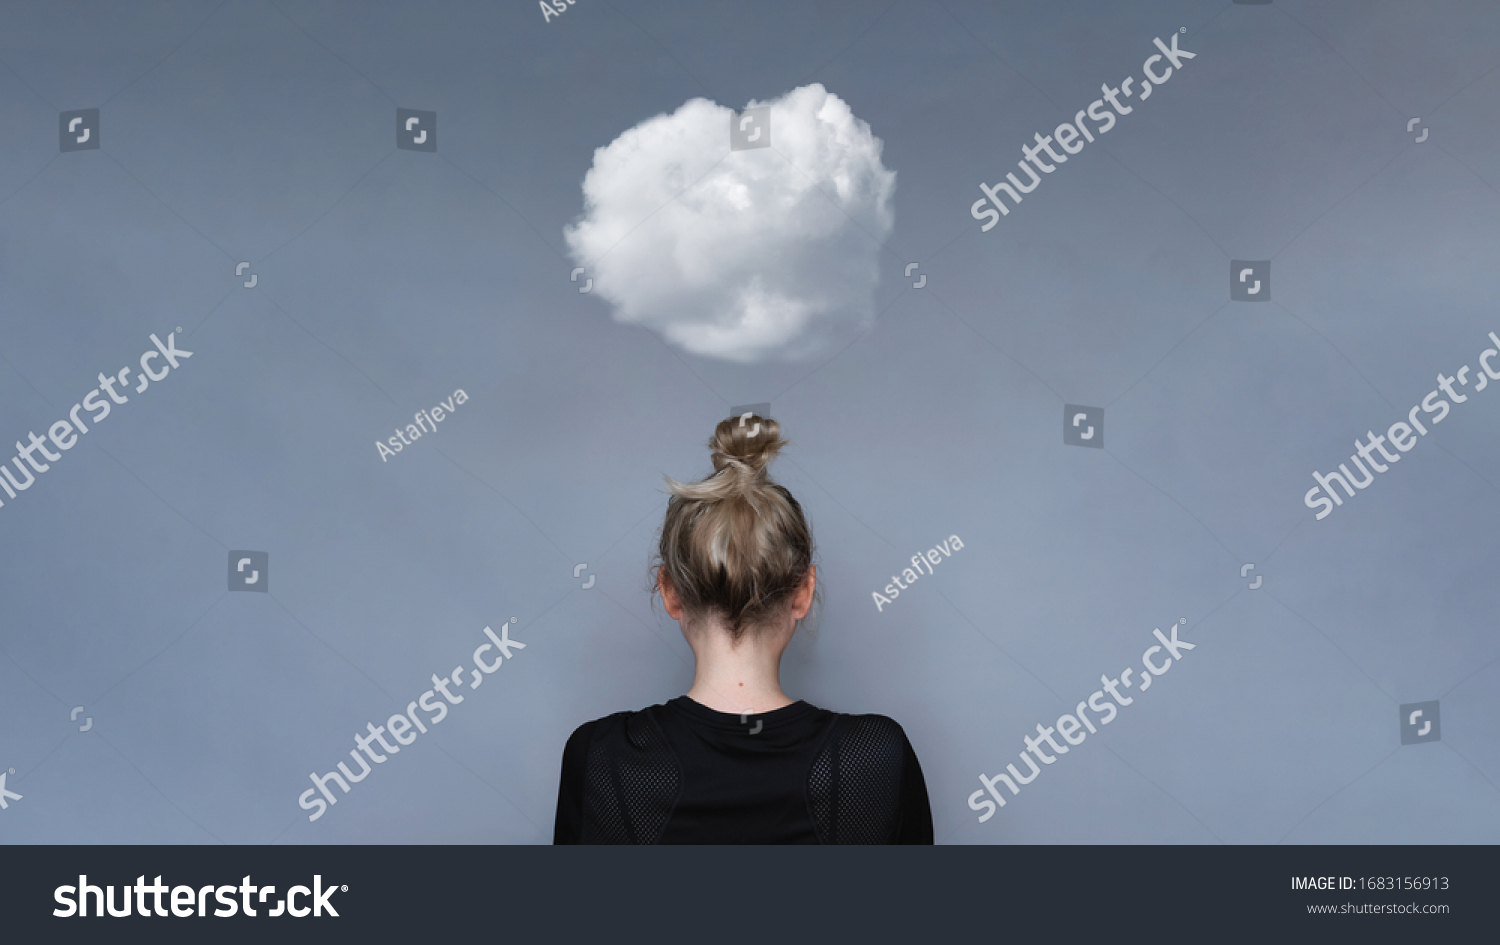 Young girl simple hairstyle back view with cloud above her head. Depression, loneliness and quarantine concept. Fashion model, trendy woman. Mental health metaphor concept #1683156913